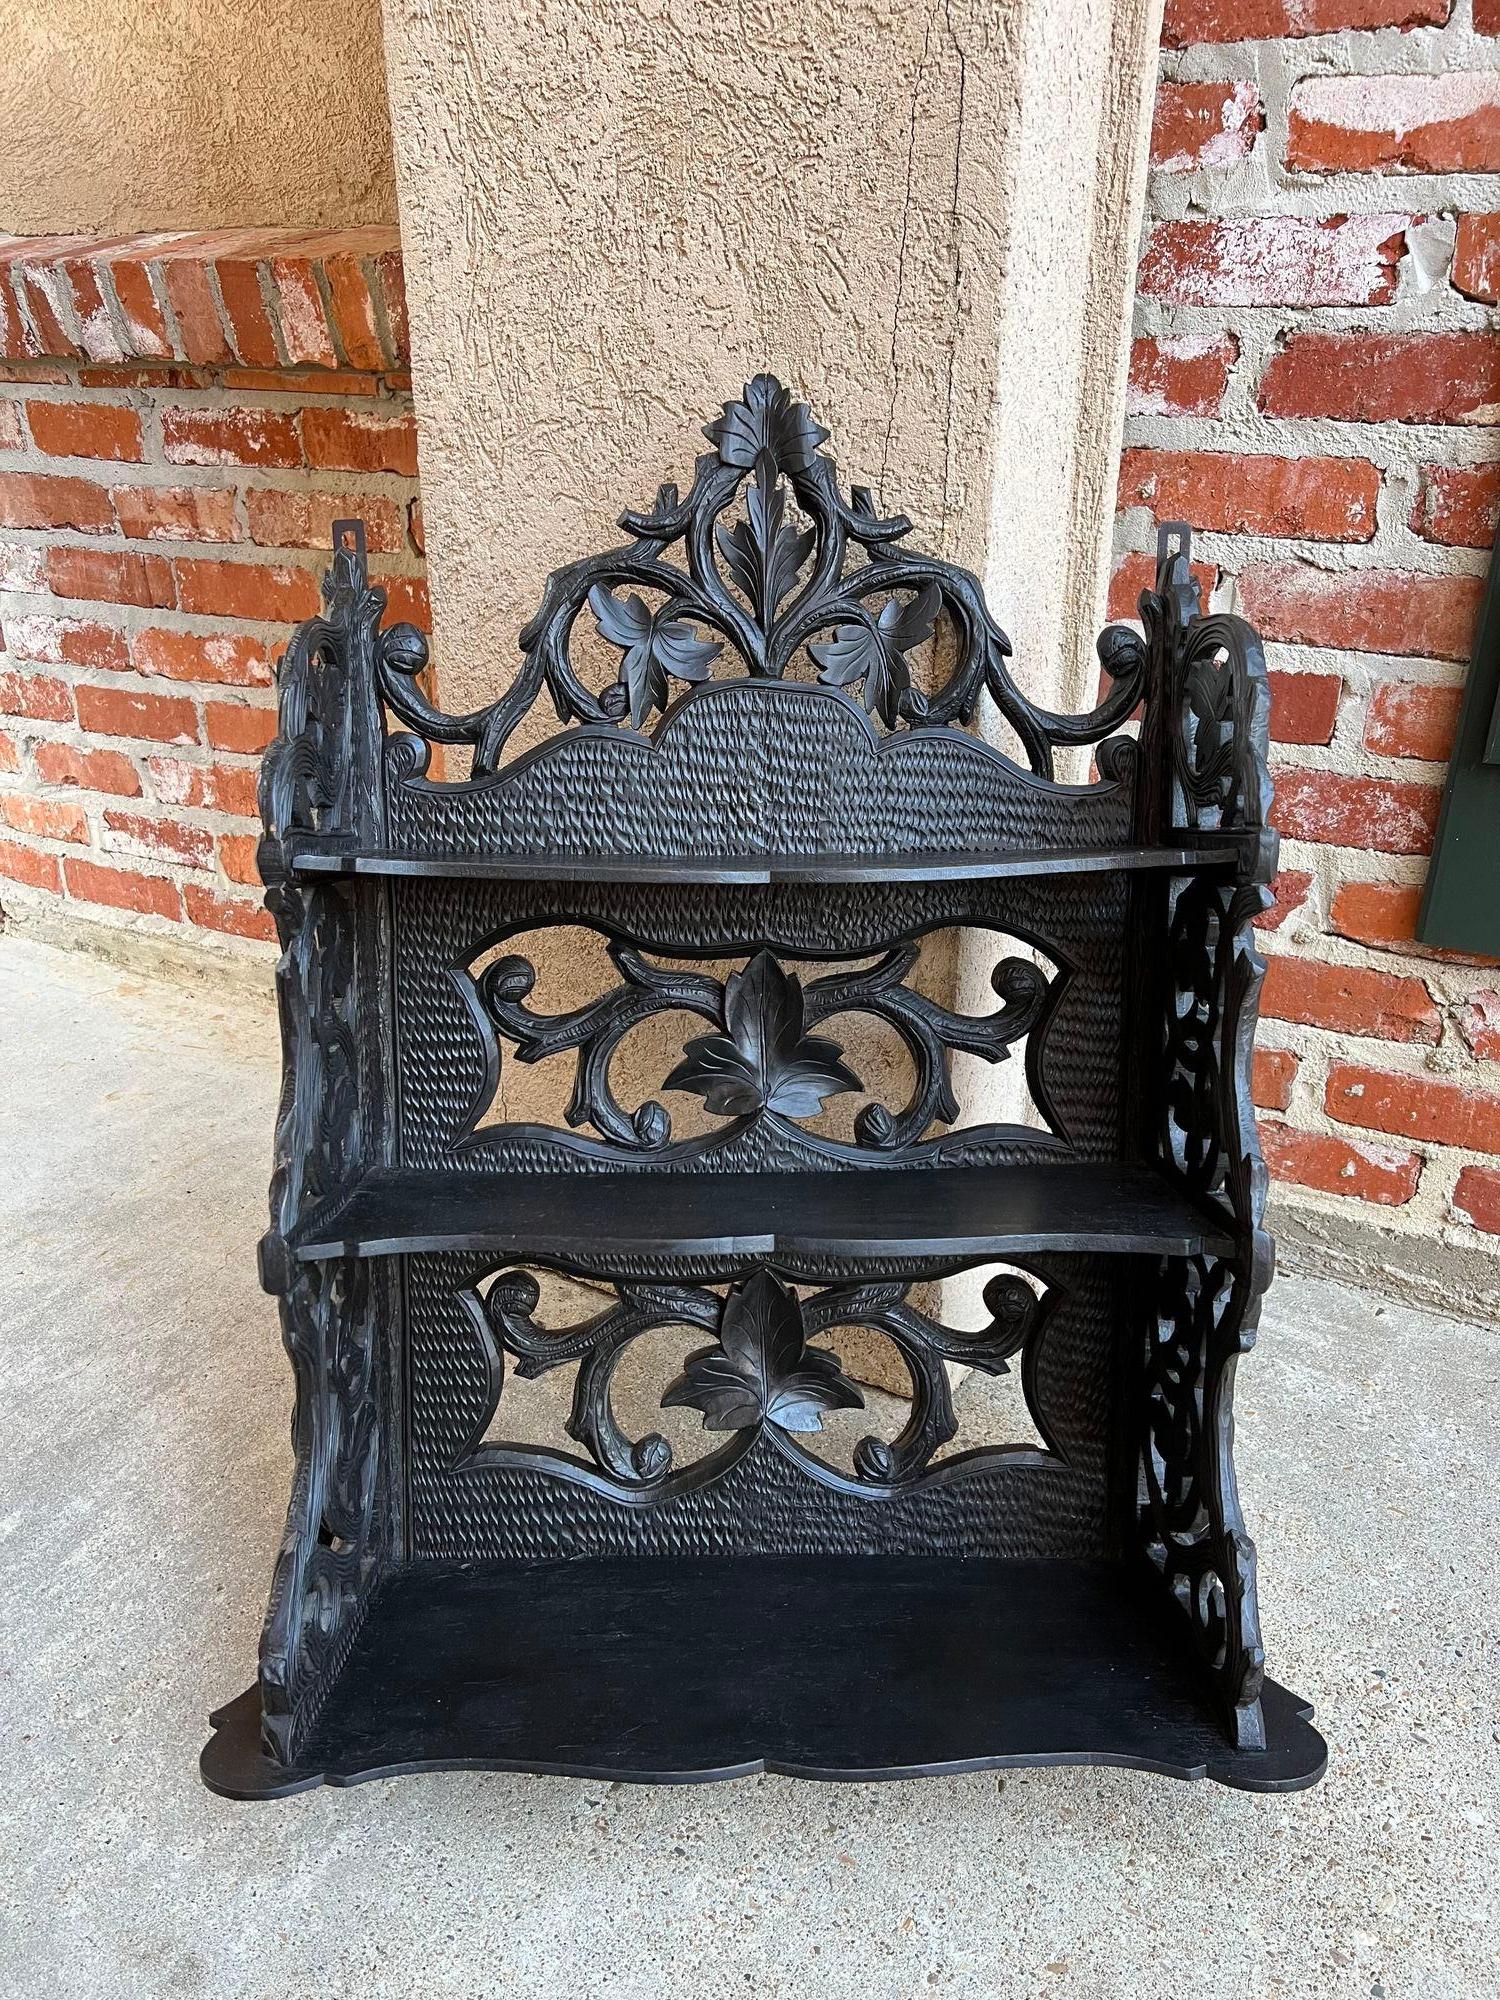 Antique European Black Forest Carved Wall Shelf Plate Display Rack German.

 Direct from Europe (and one of our favorite finds), this stunning Black Forest carved wall shelf/display rack. Elaborate hand carvings throughout, with a high upper crown